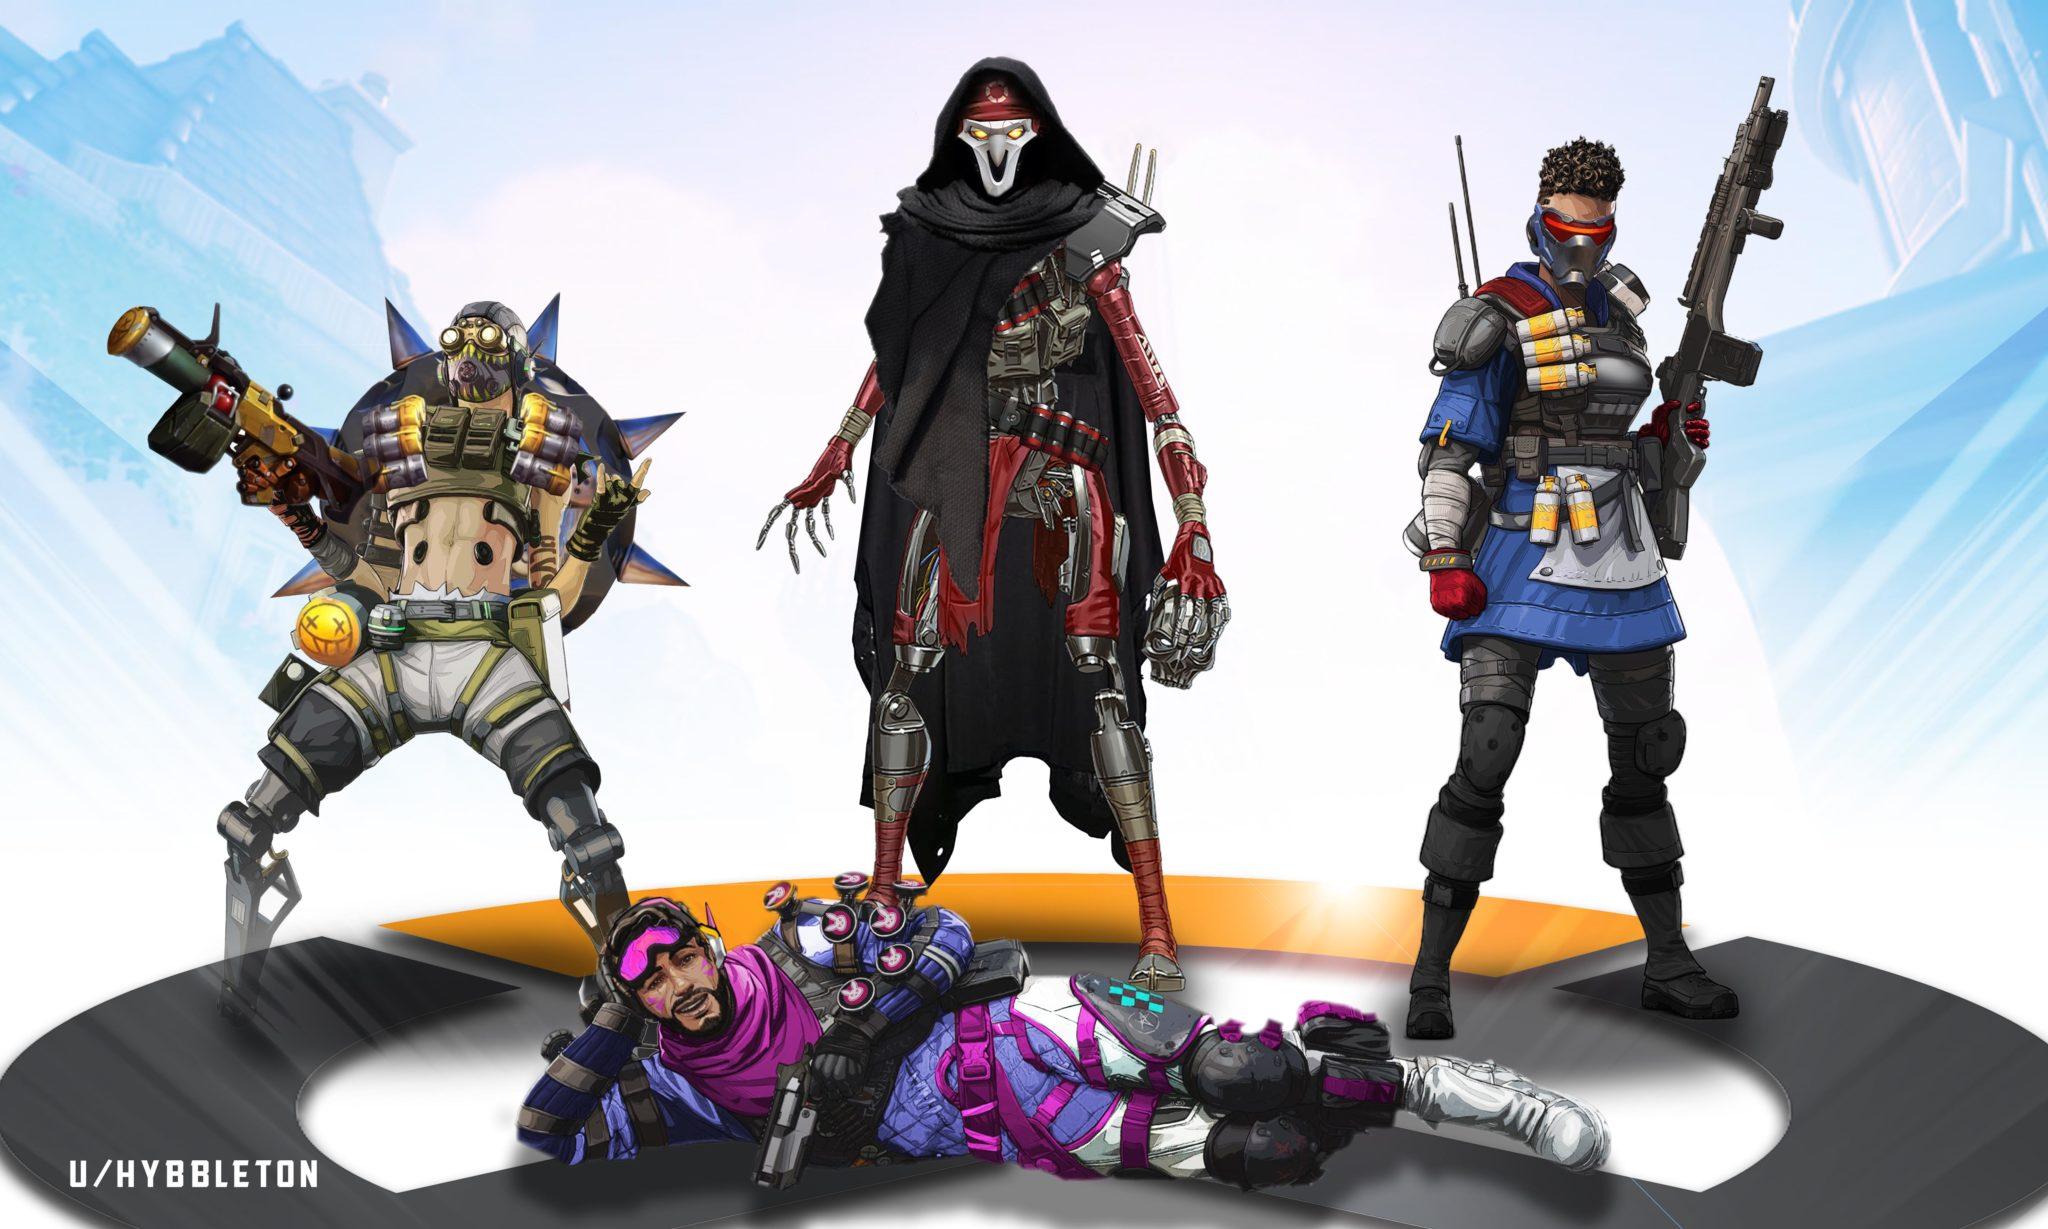 Apex Legends characters designed as Overwatch skins